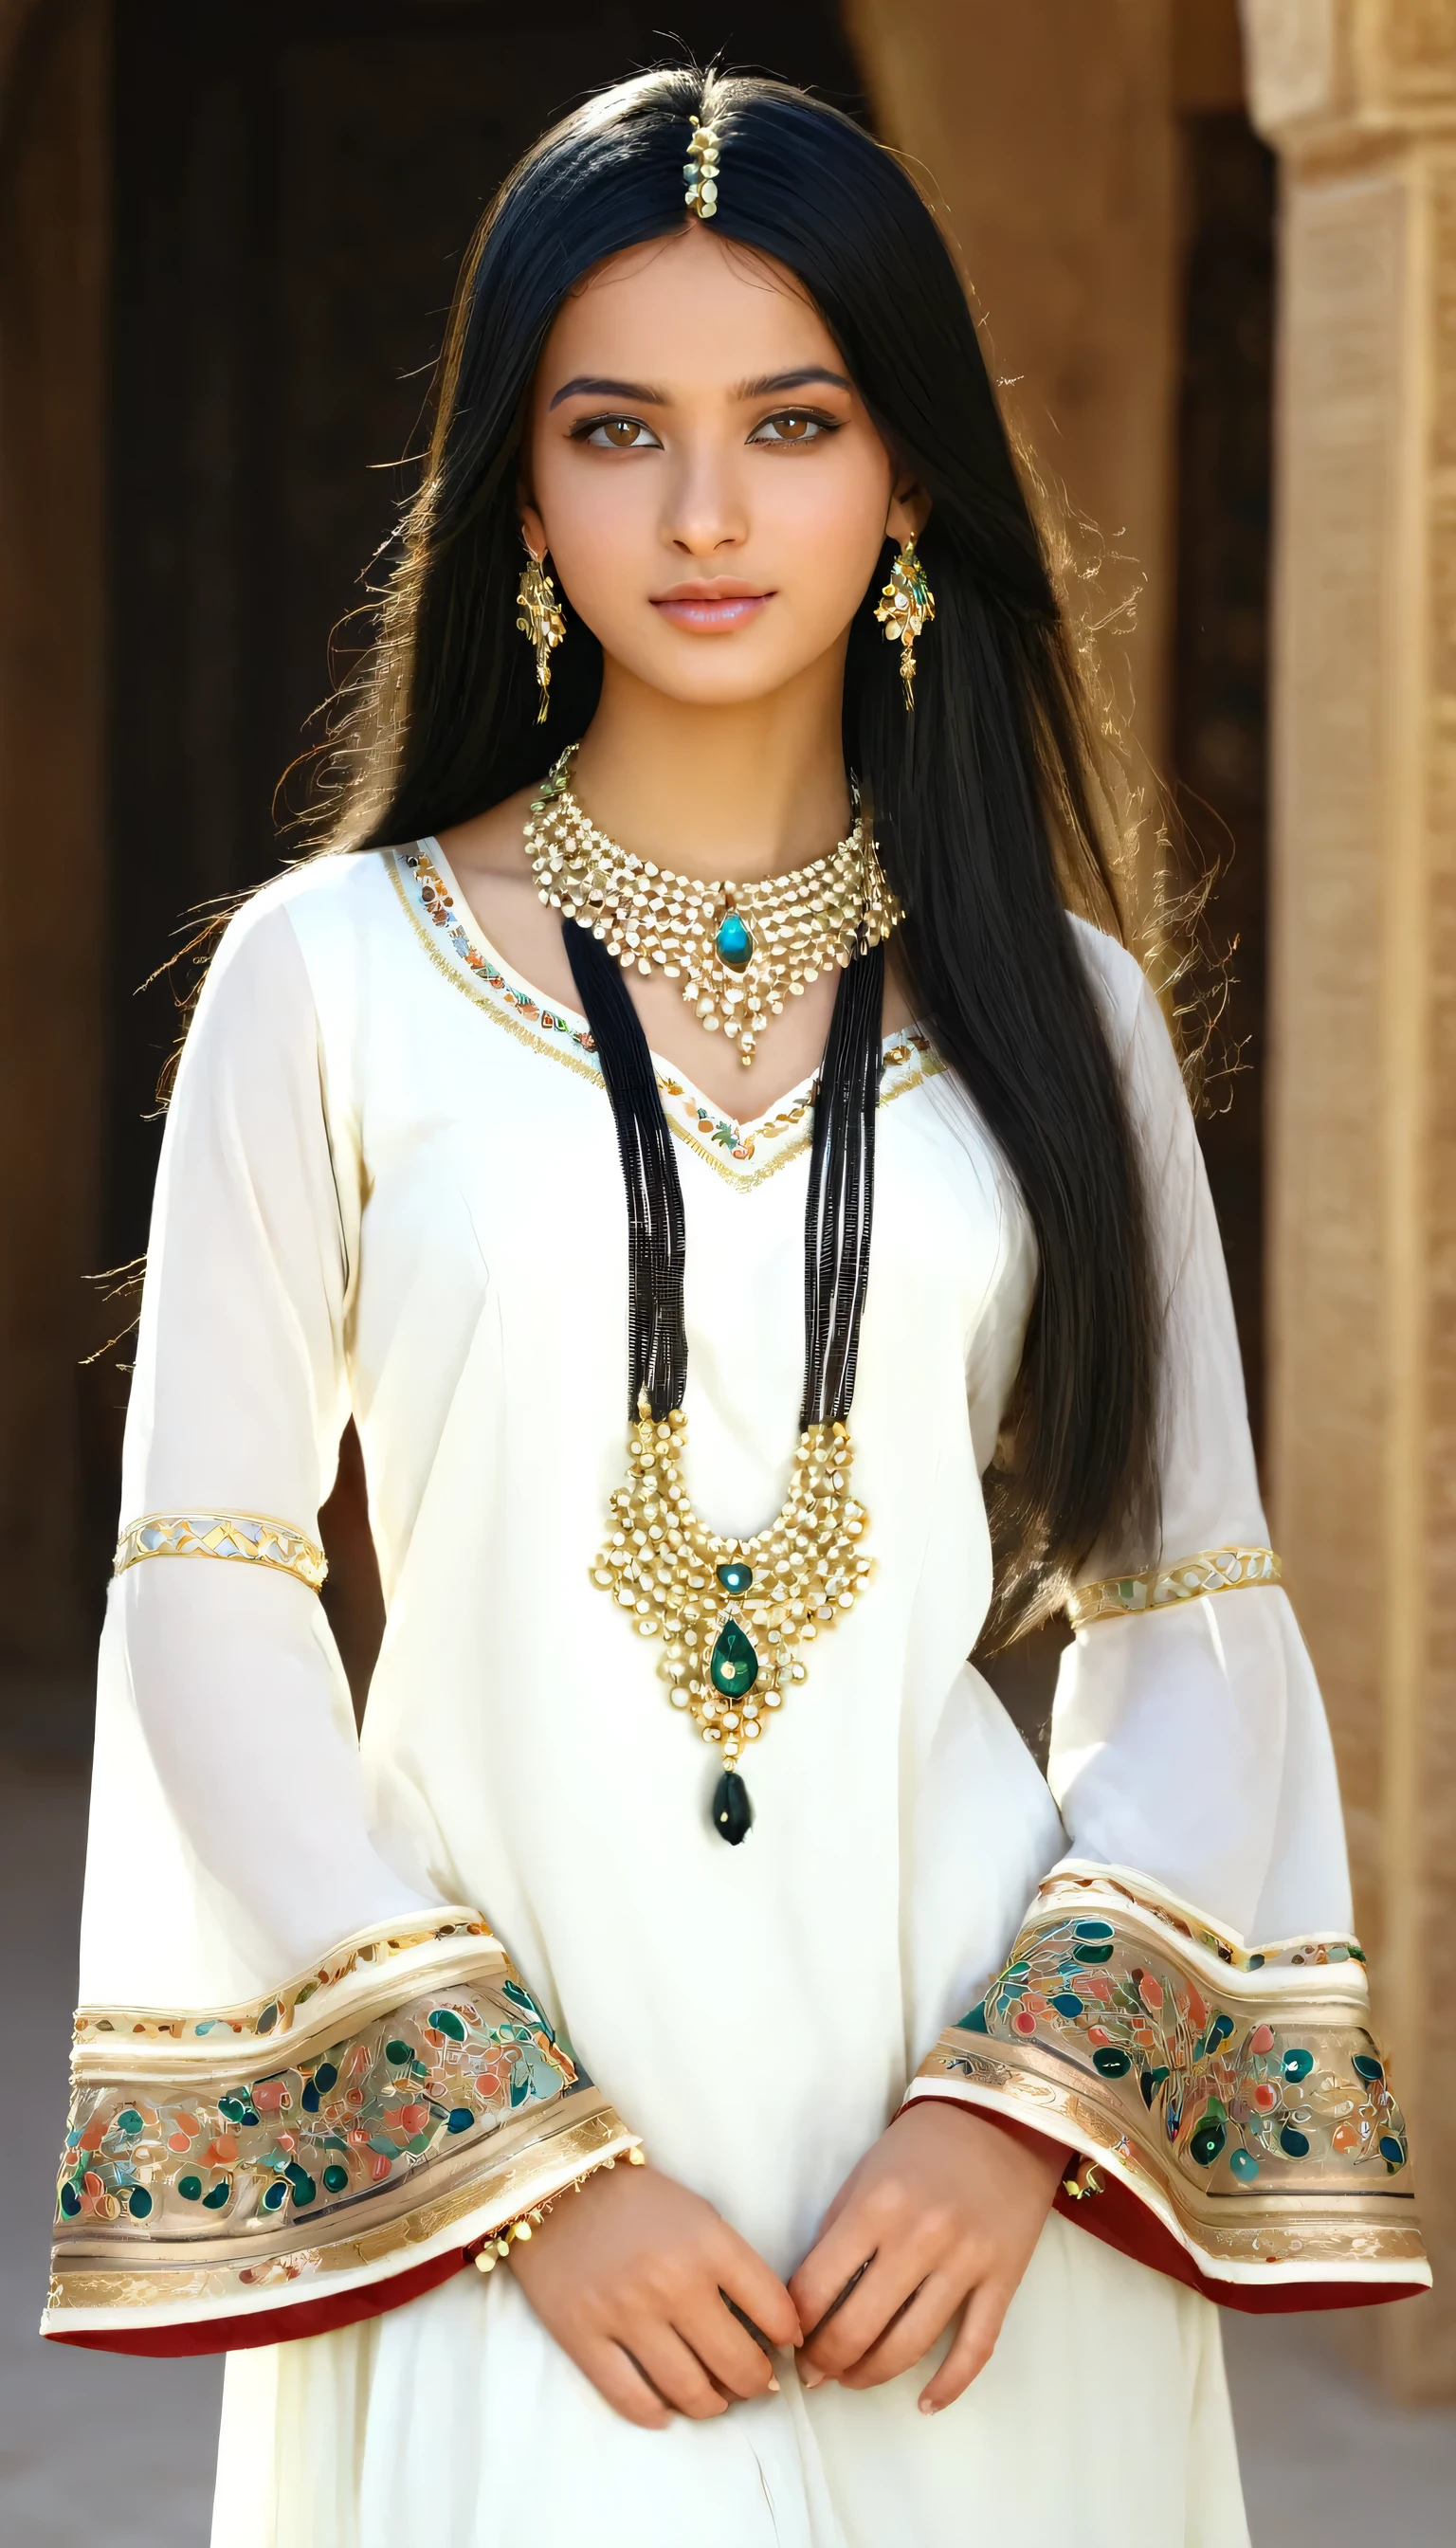 Arab girl in traditional clothes, fashion accessory, embellishment, 1girl, solo, realistic, dress, looking_at_viewer, long_hair, jewelry, black_hair, long_sleeves, necklace